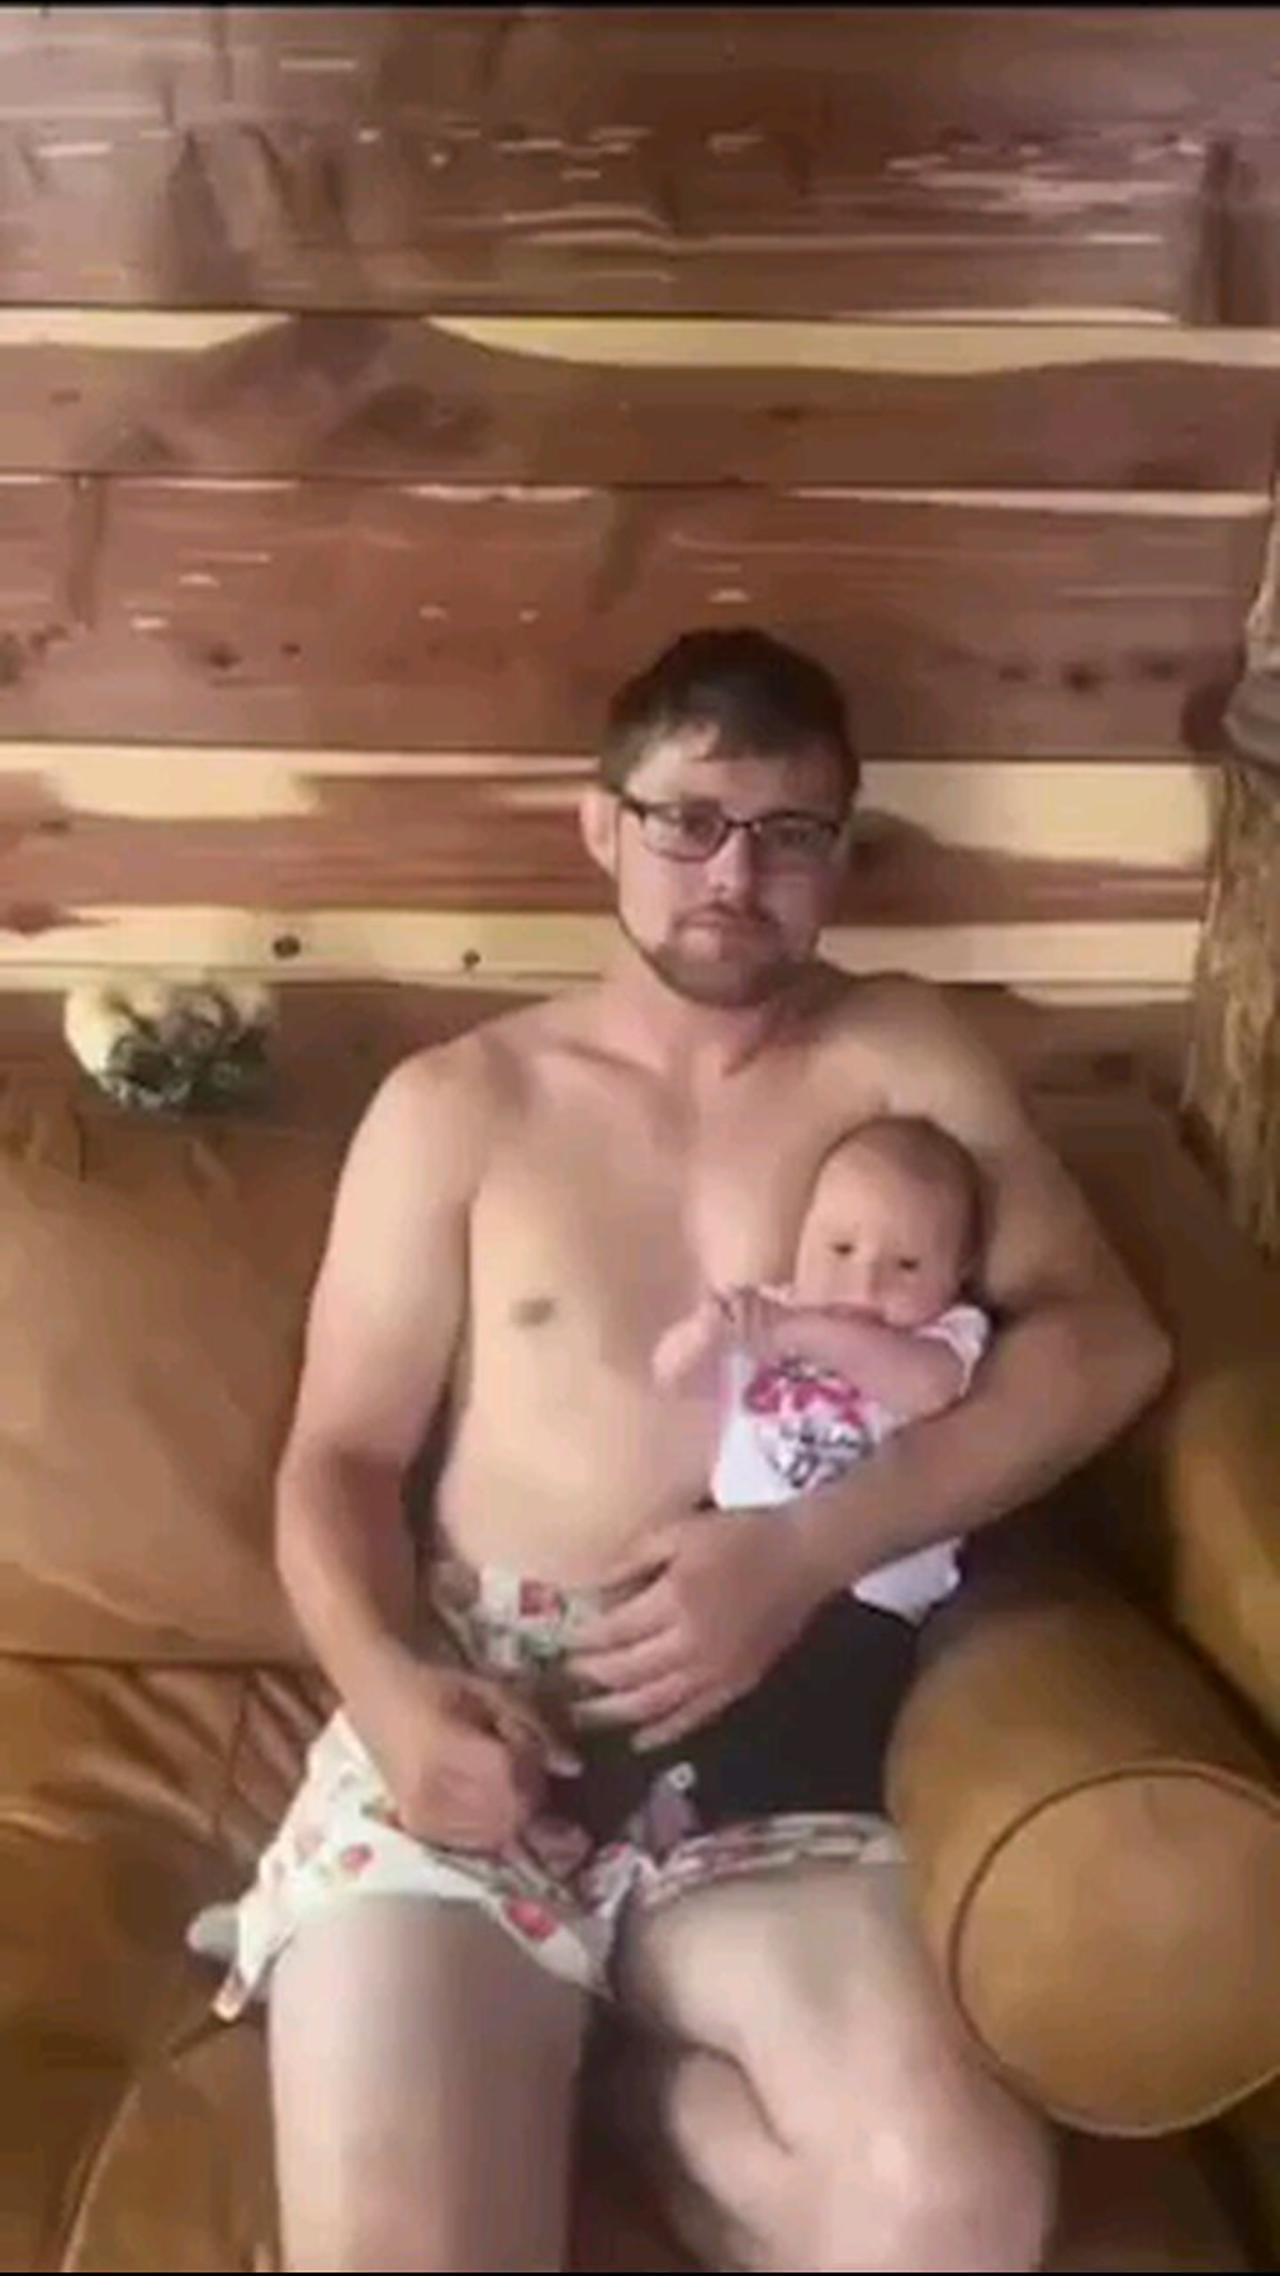 UFC Fighter Refuses To Let His Child Anywhere Near Quaccines Or Communists NEVER COMPLY!